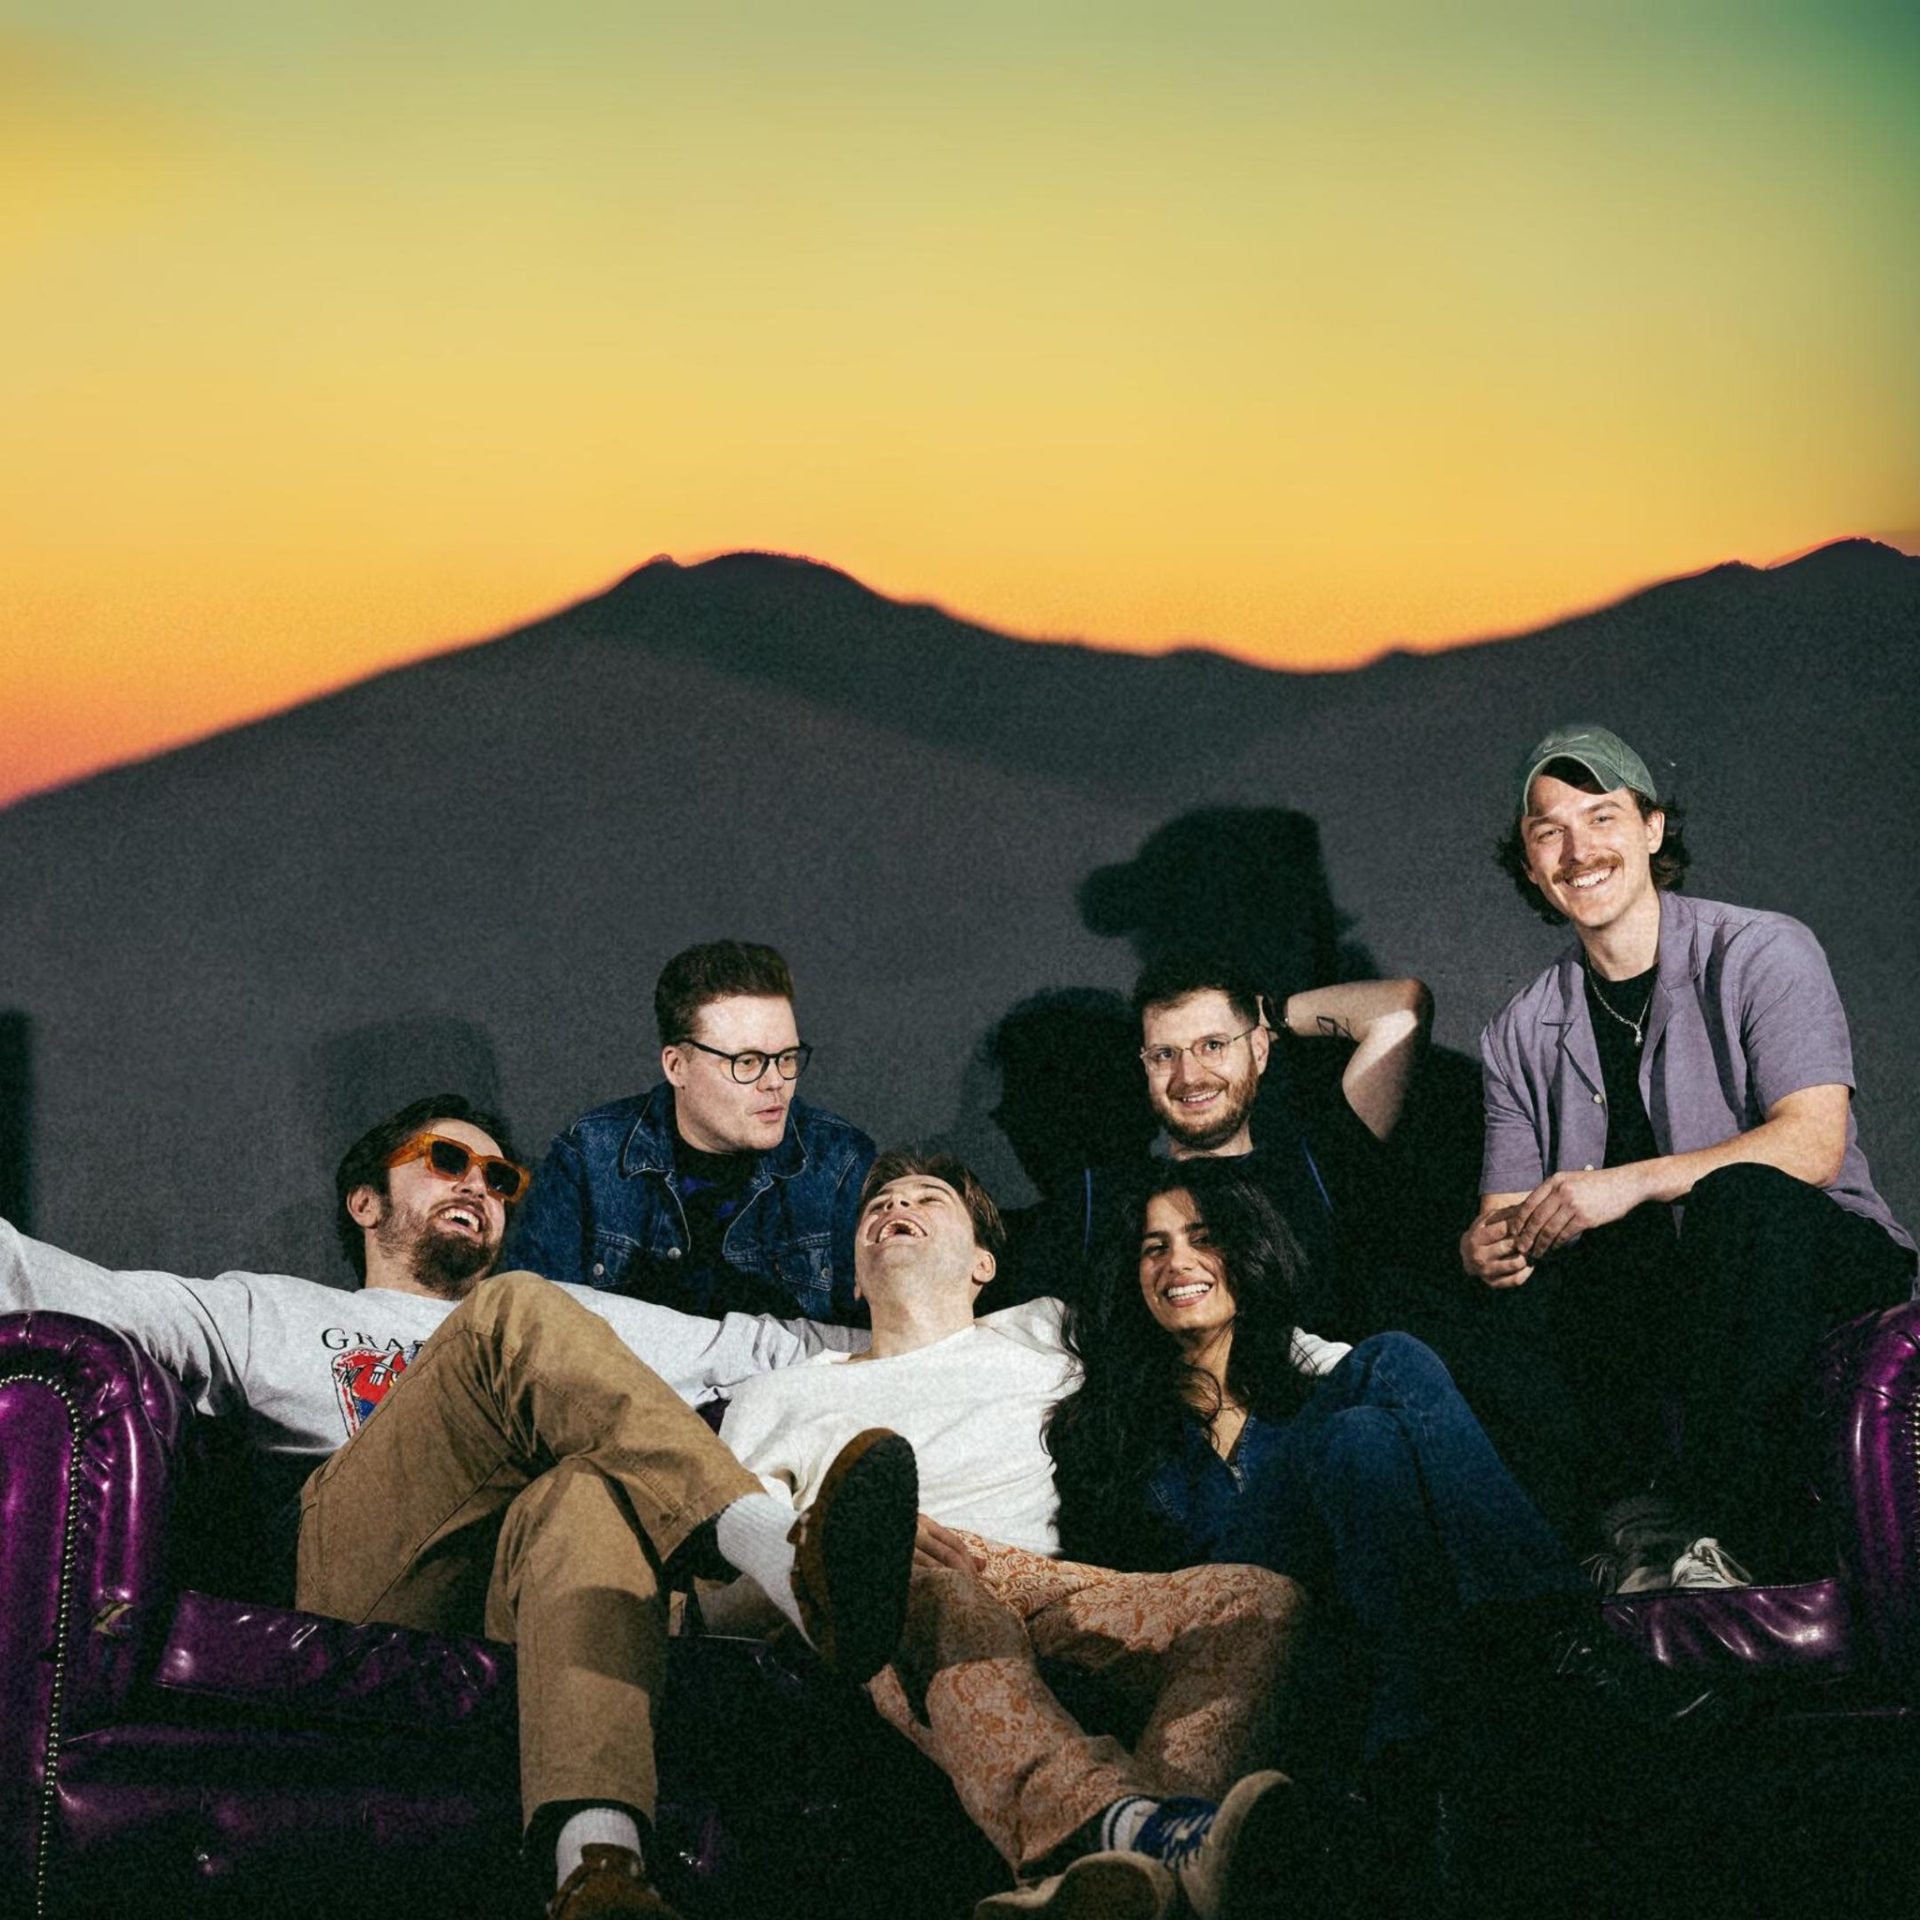 The six members of the band smiling, sitting in front of a mountain backdrop at sunset.